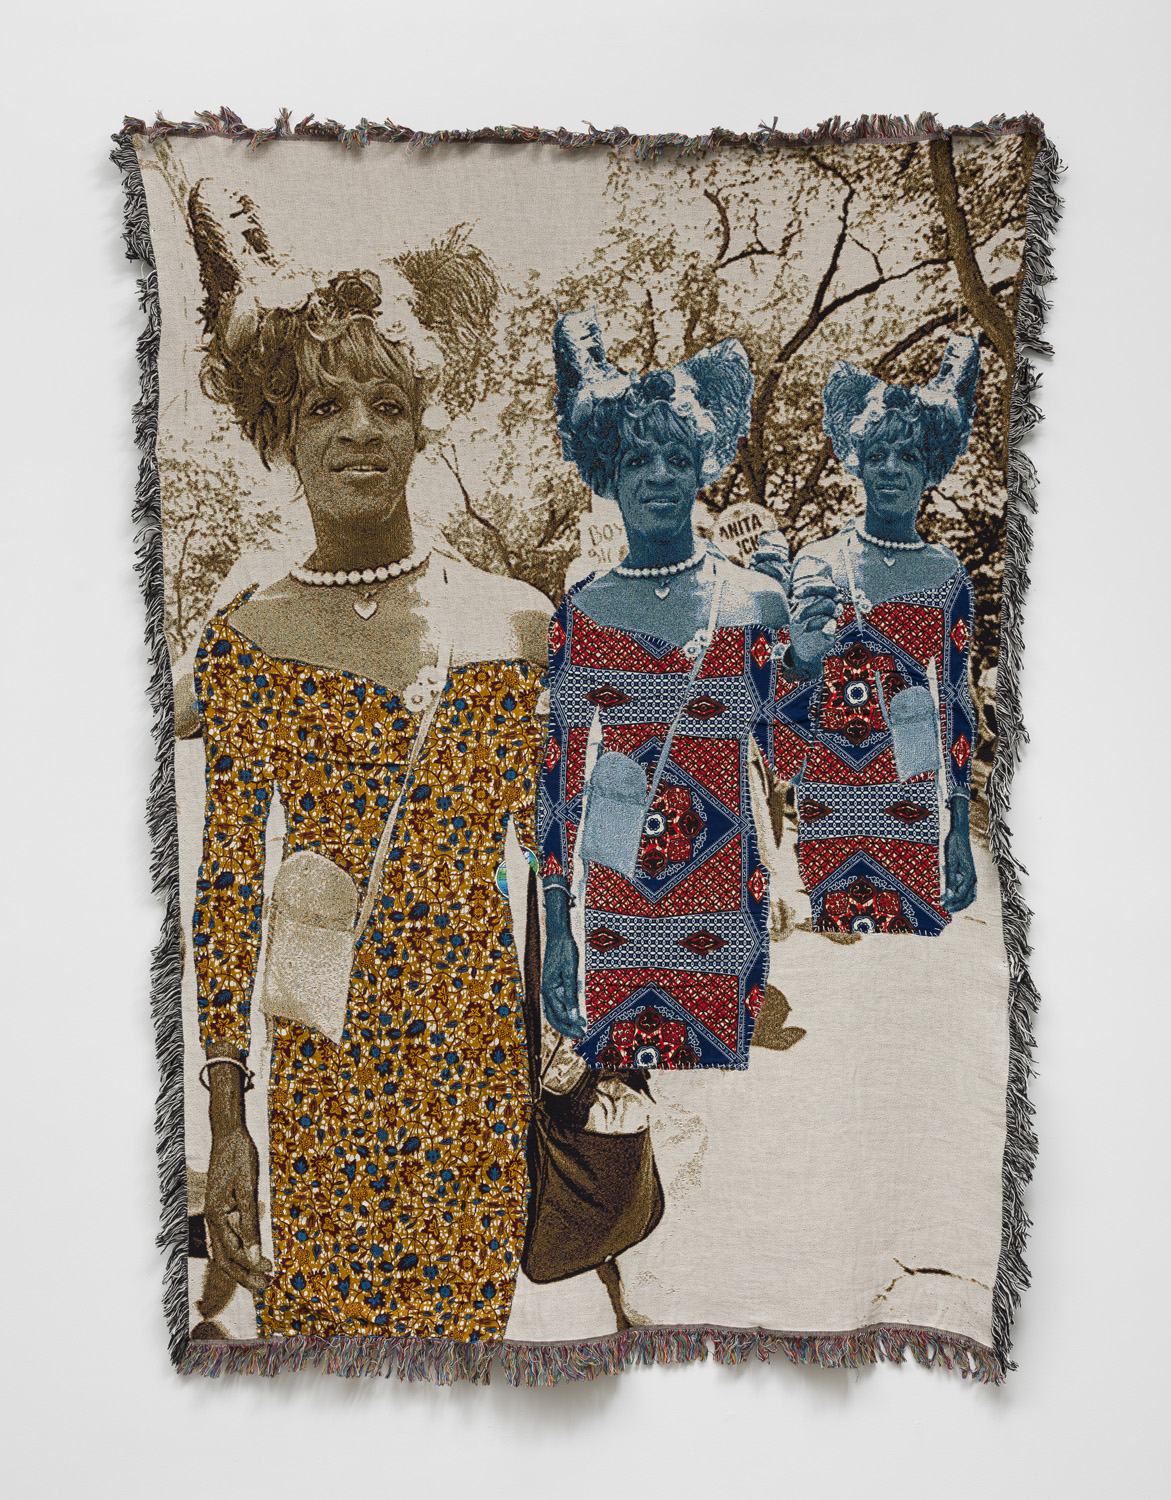 carpet piece of april bey, picture of marsha p johnson forwarded in various fabrics